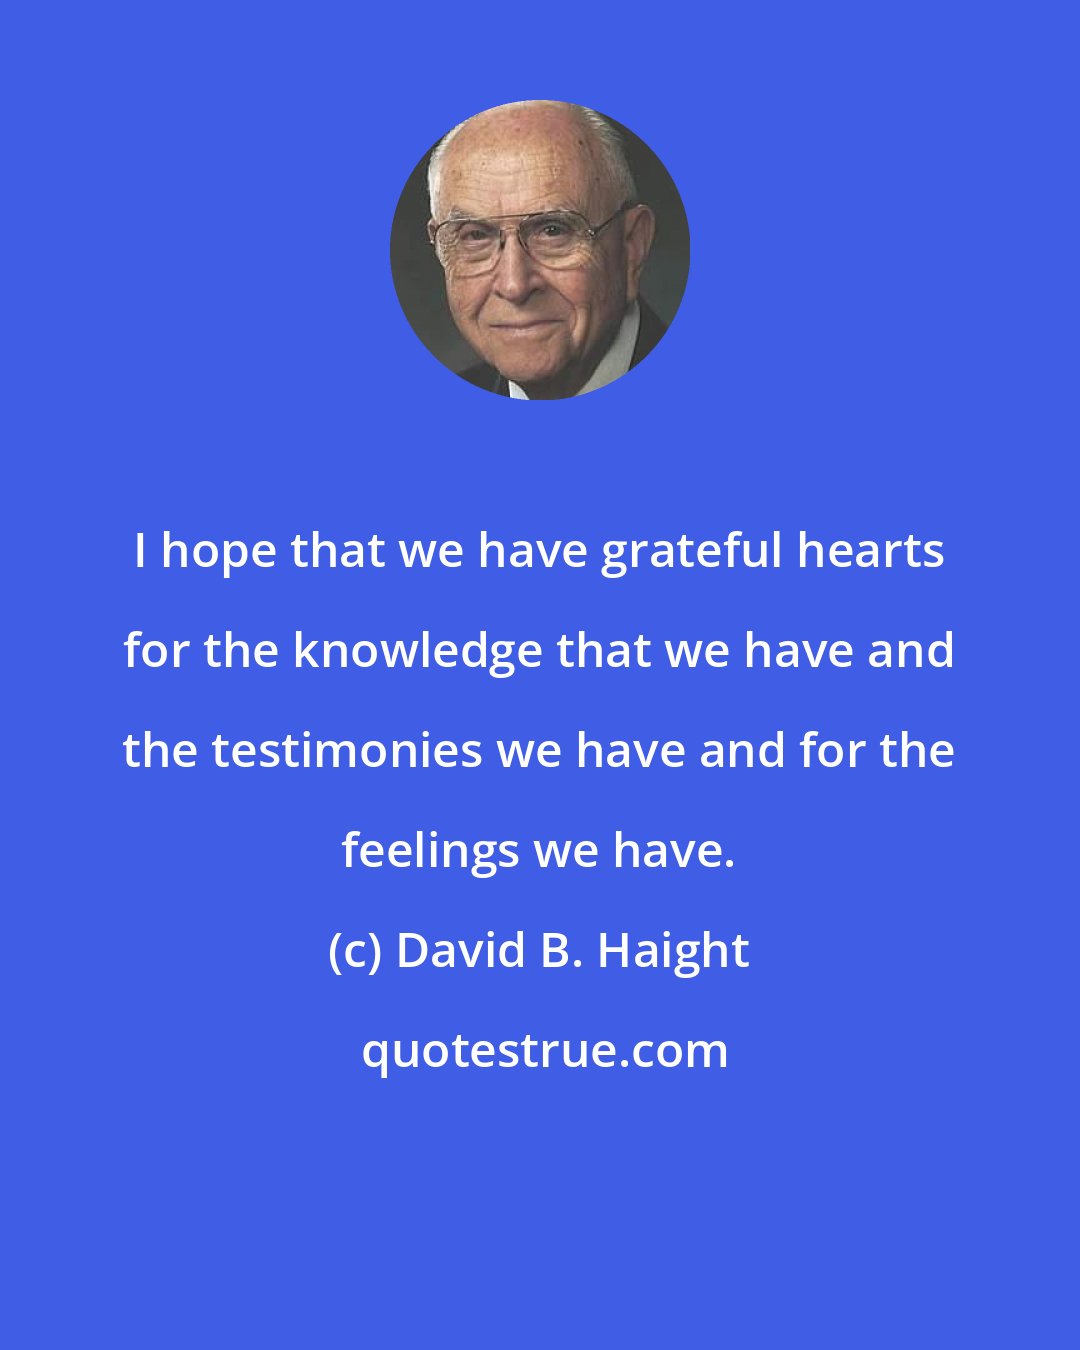 David B. Haight: I hope that we have grateful hearts for the knowledge that we have and the testimonies we have and for the feelings we have.